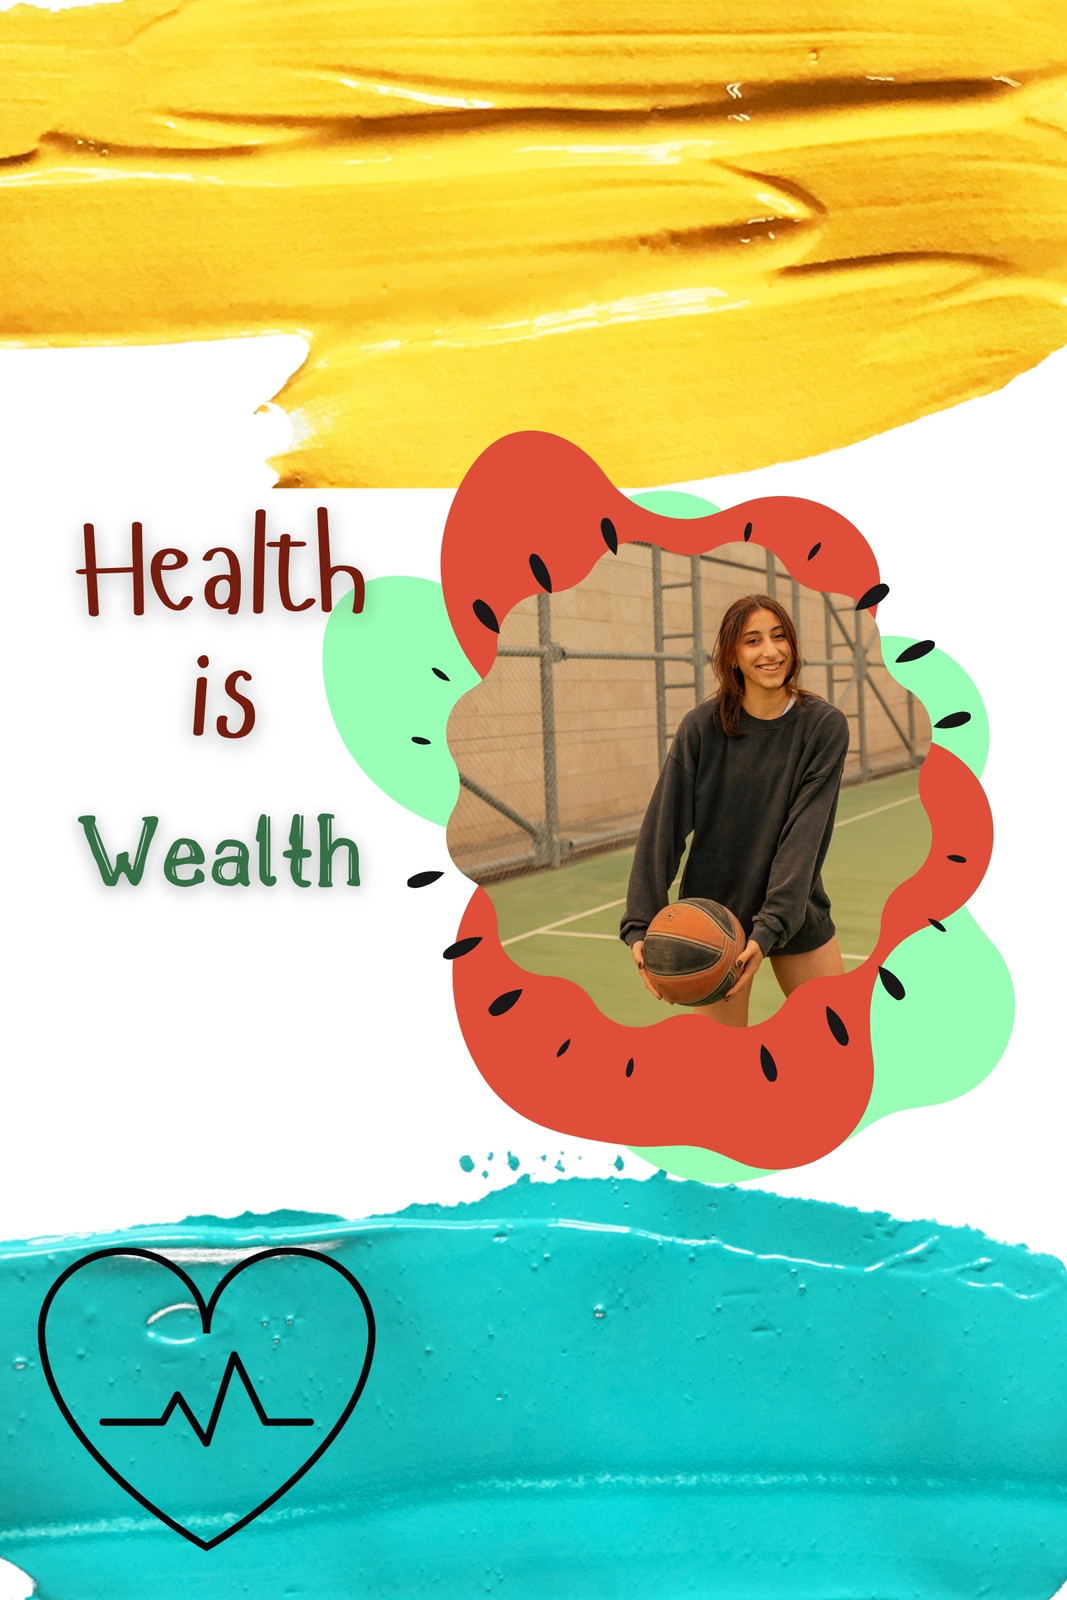 Pin on Health is wealth